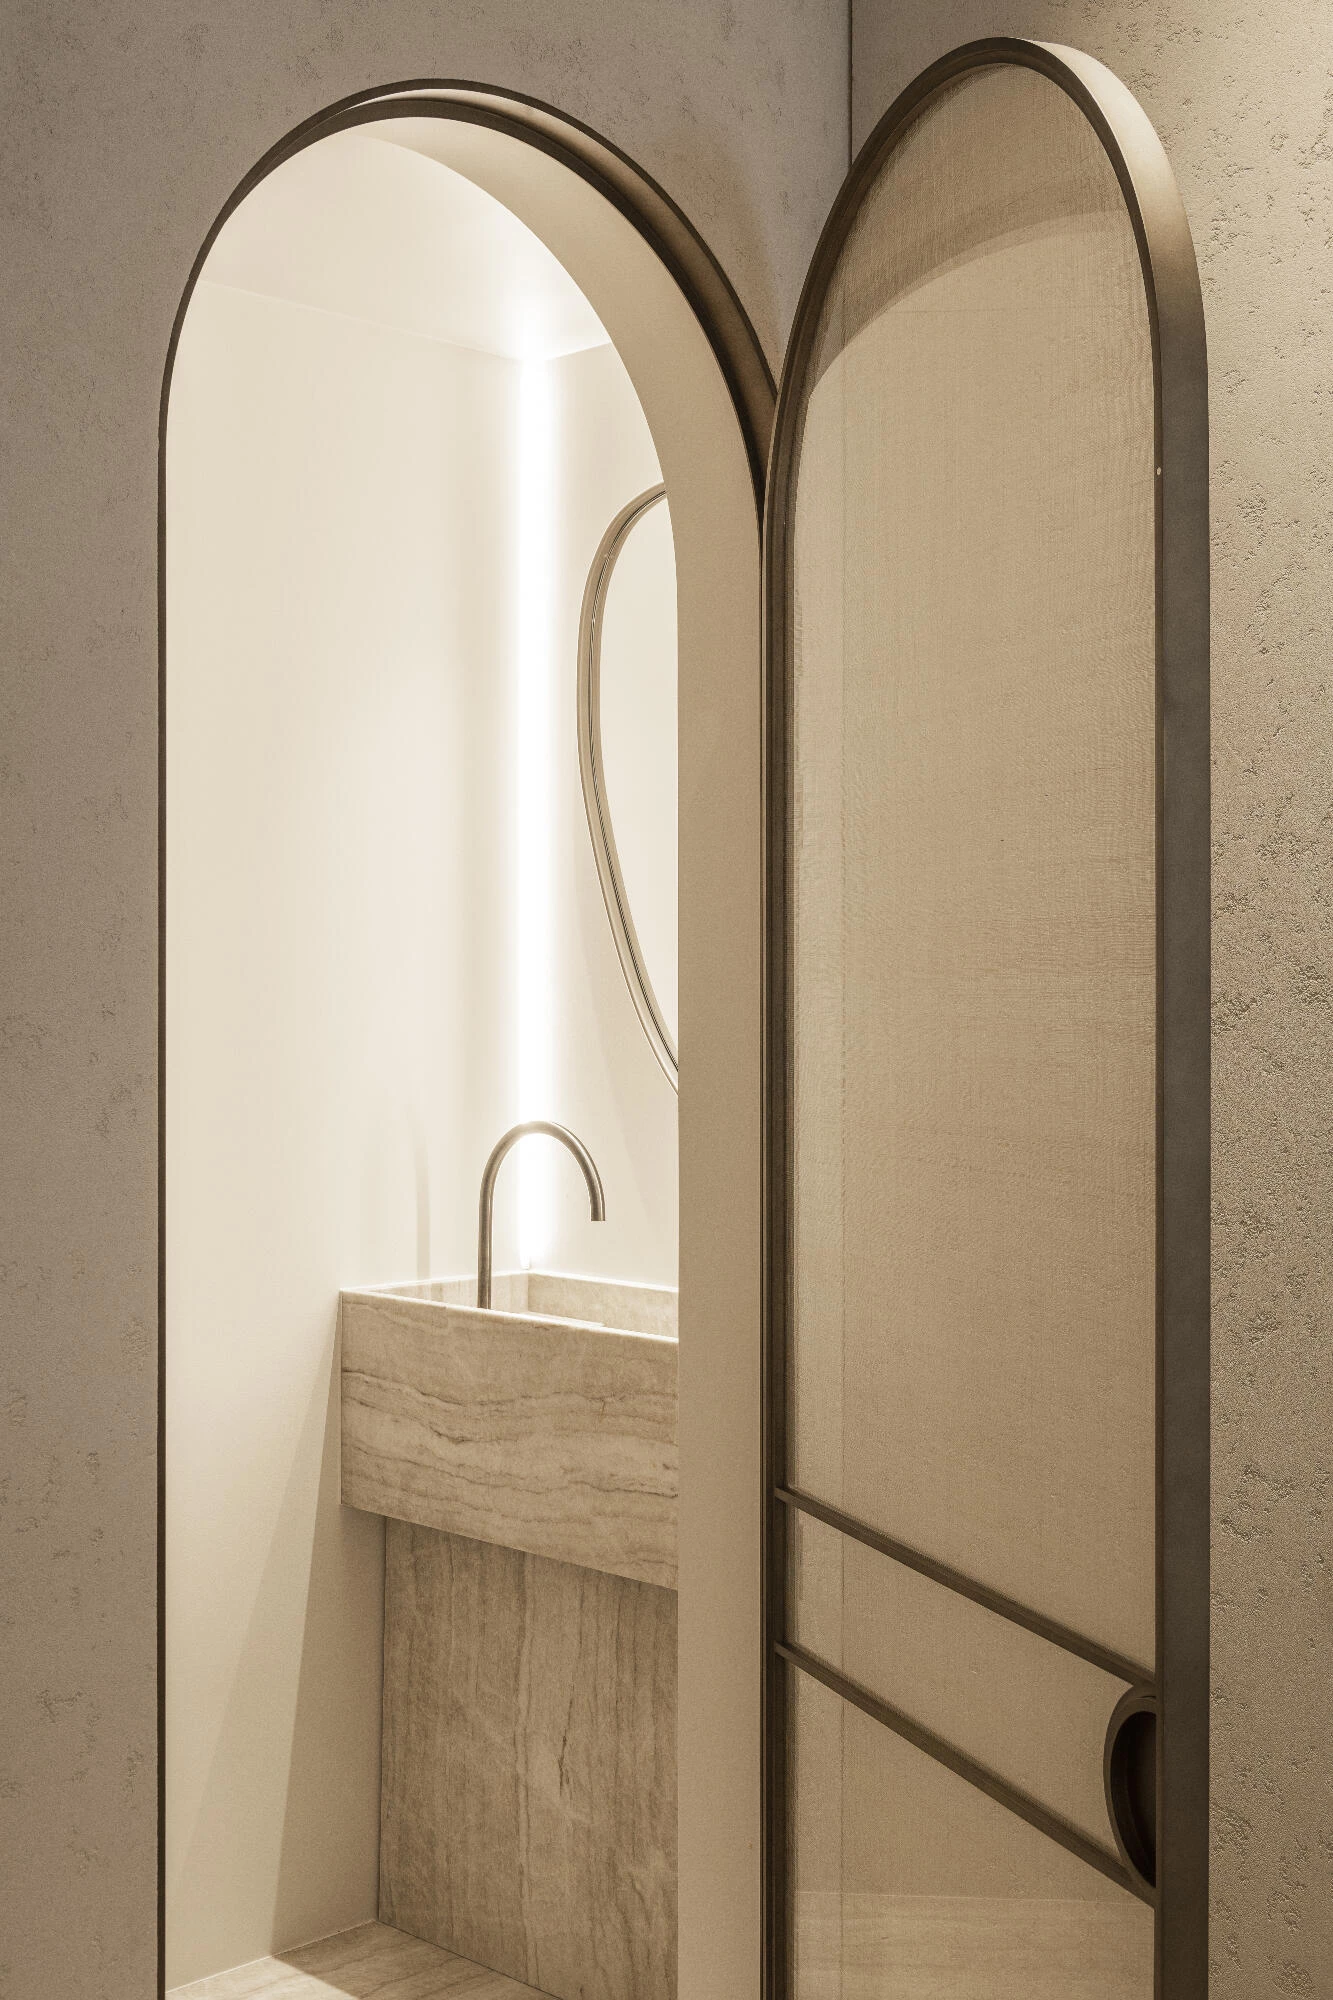 Doorway with washbasin and Thalostuc wall finishes in Obumex showroom in Paris